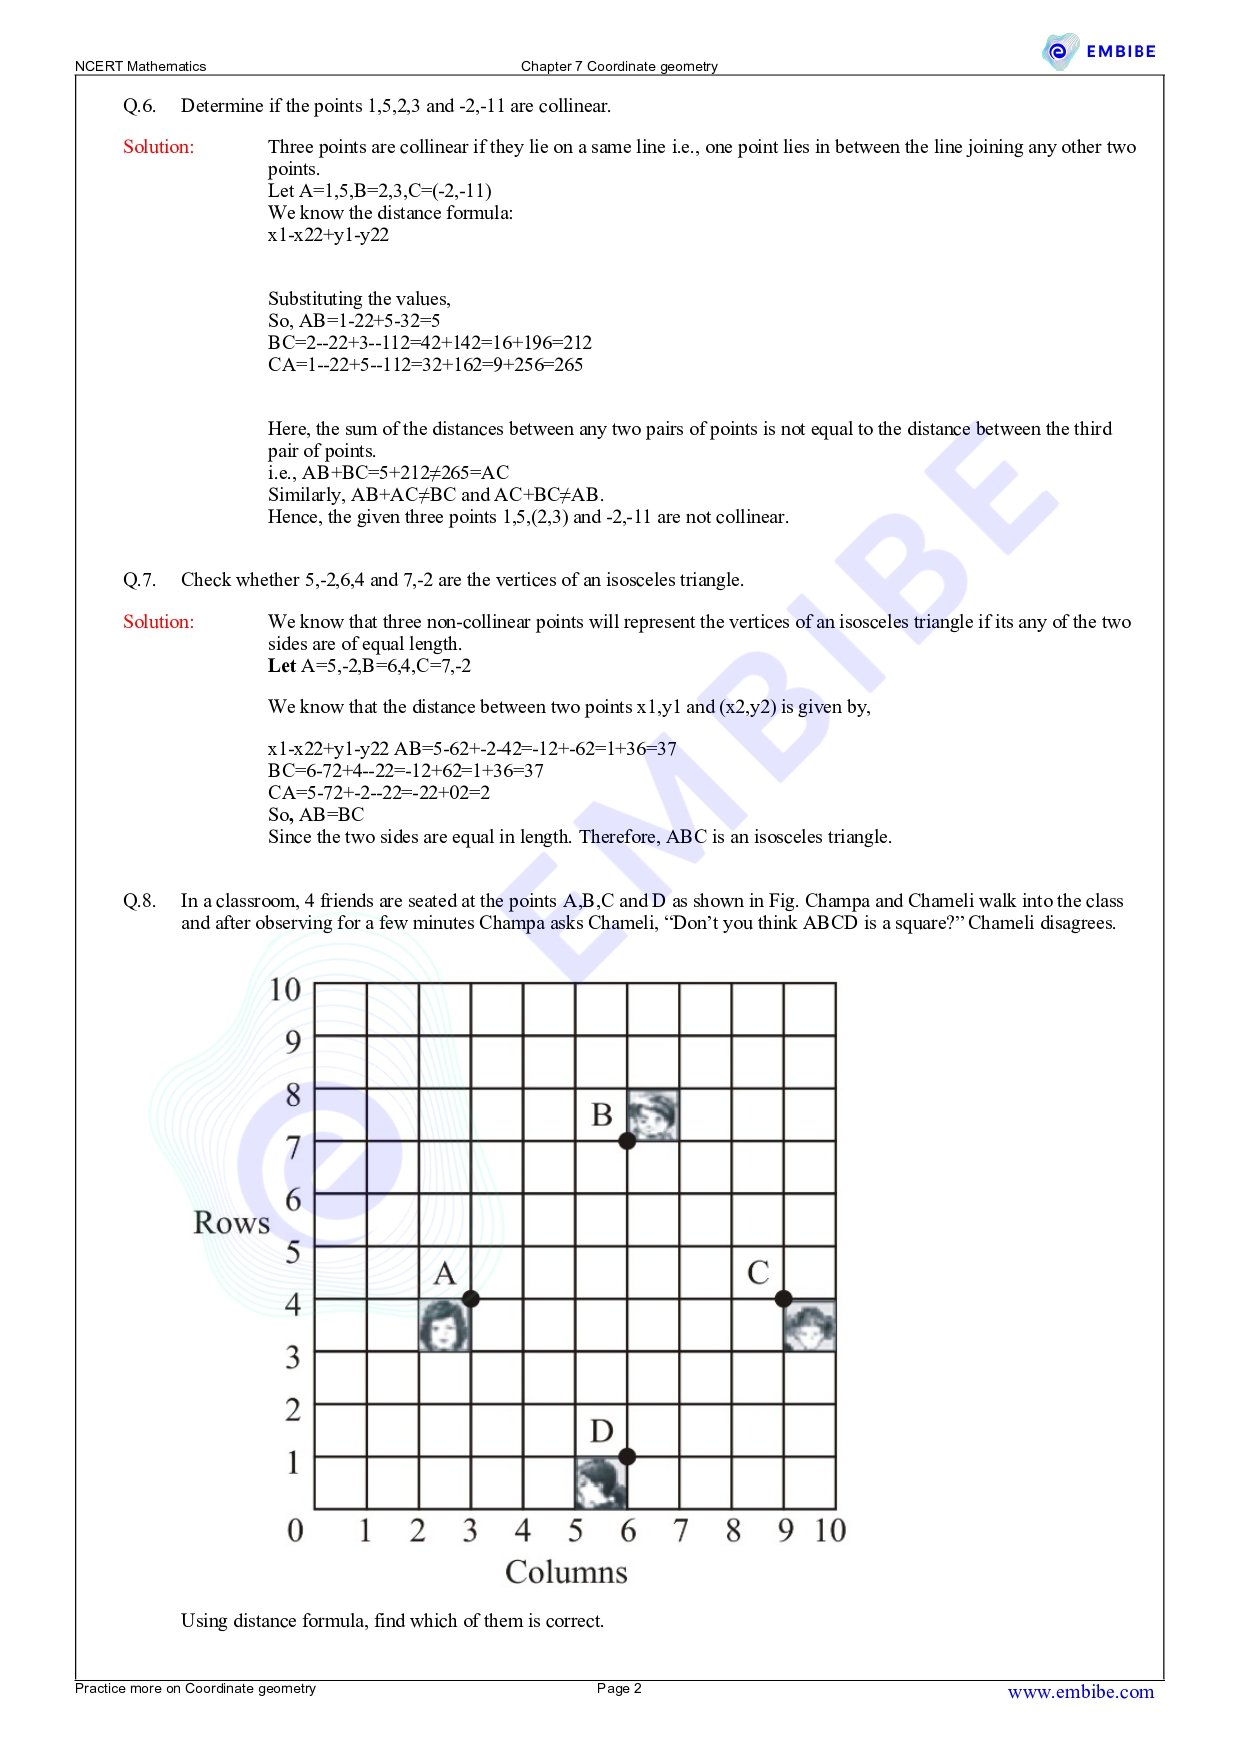 NCERT Solutions for Coordinate Geometry Exercise 7.2 Class 10 Maths